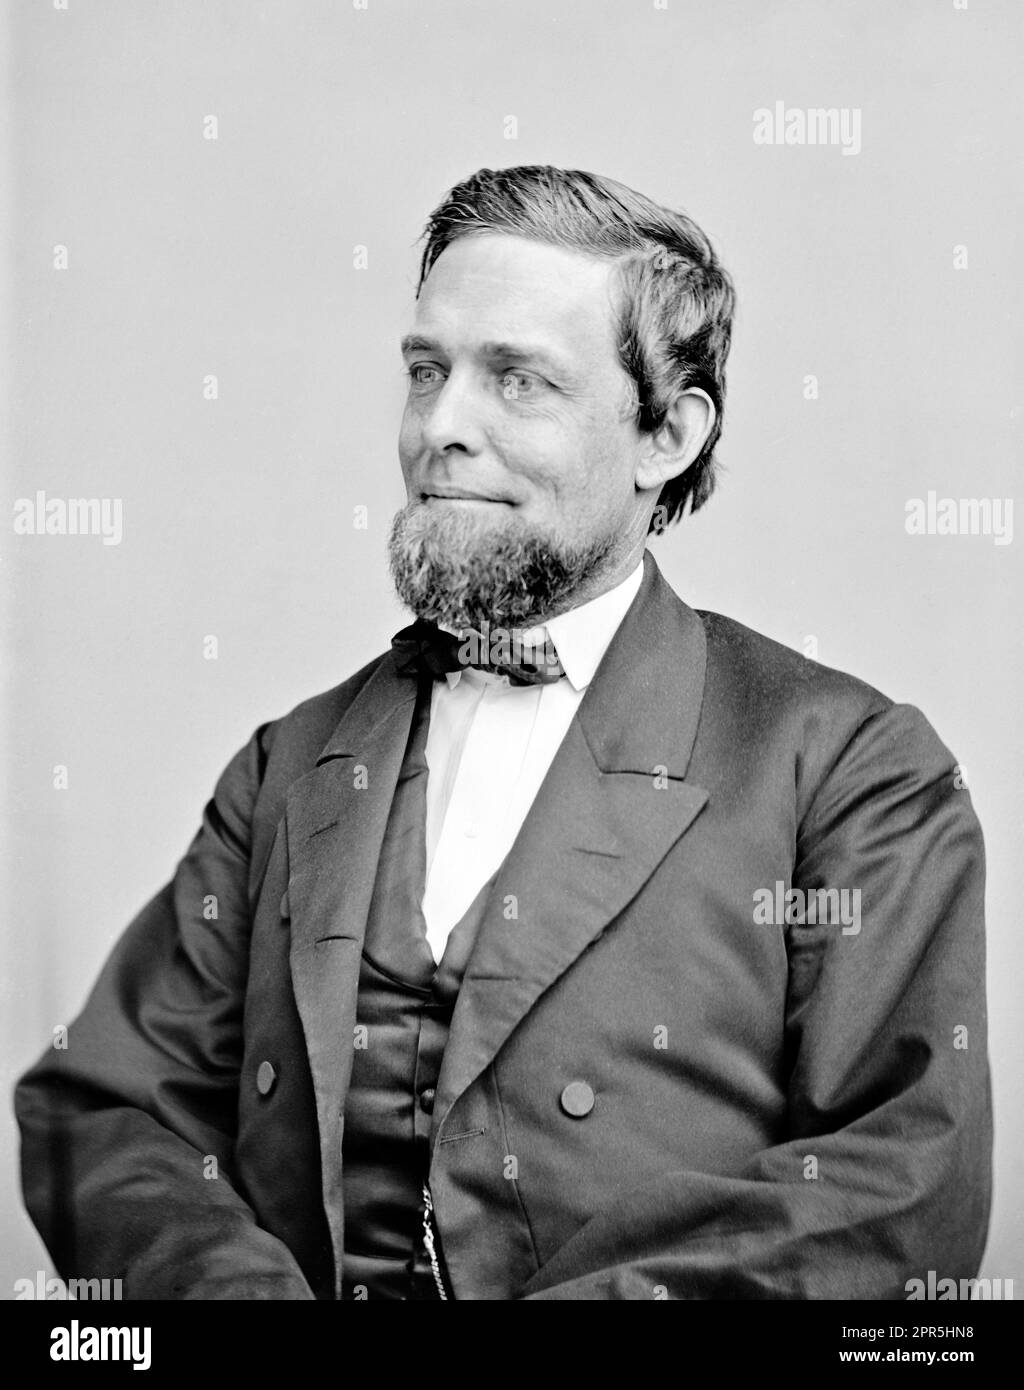 Schuyler Colfax. Portrait of the journalist and 17th Vice President of the United States, Schuyler Colfax (1823-1885), c. 1860-70 Stock Photo